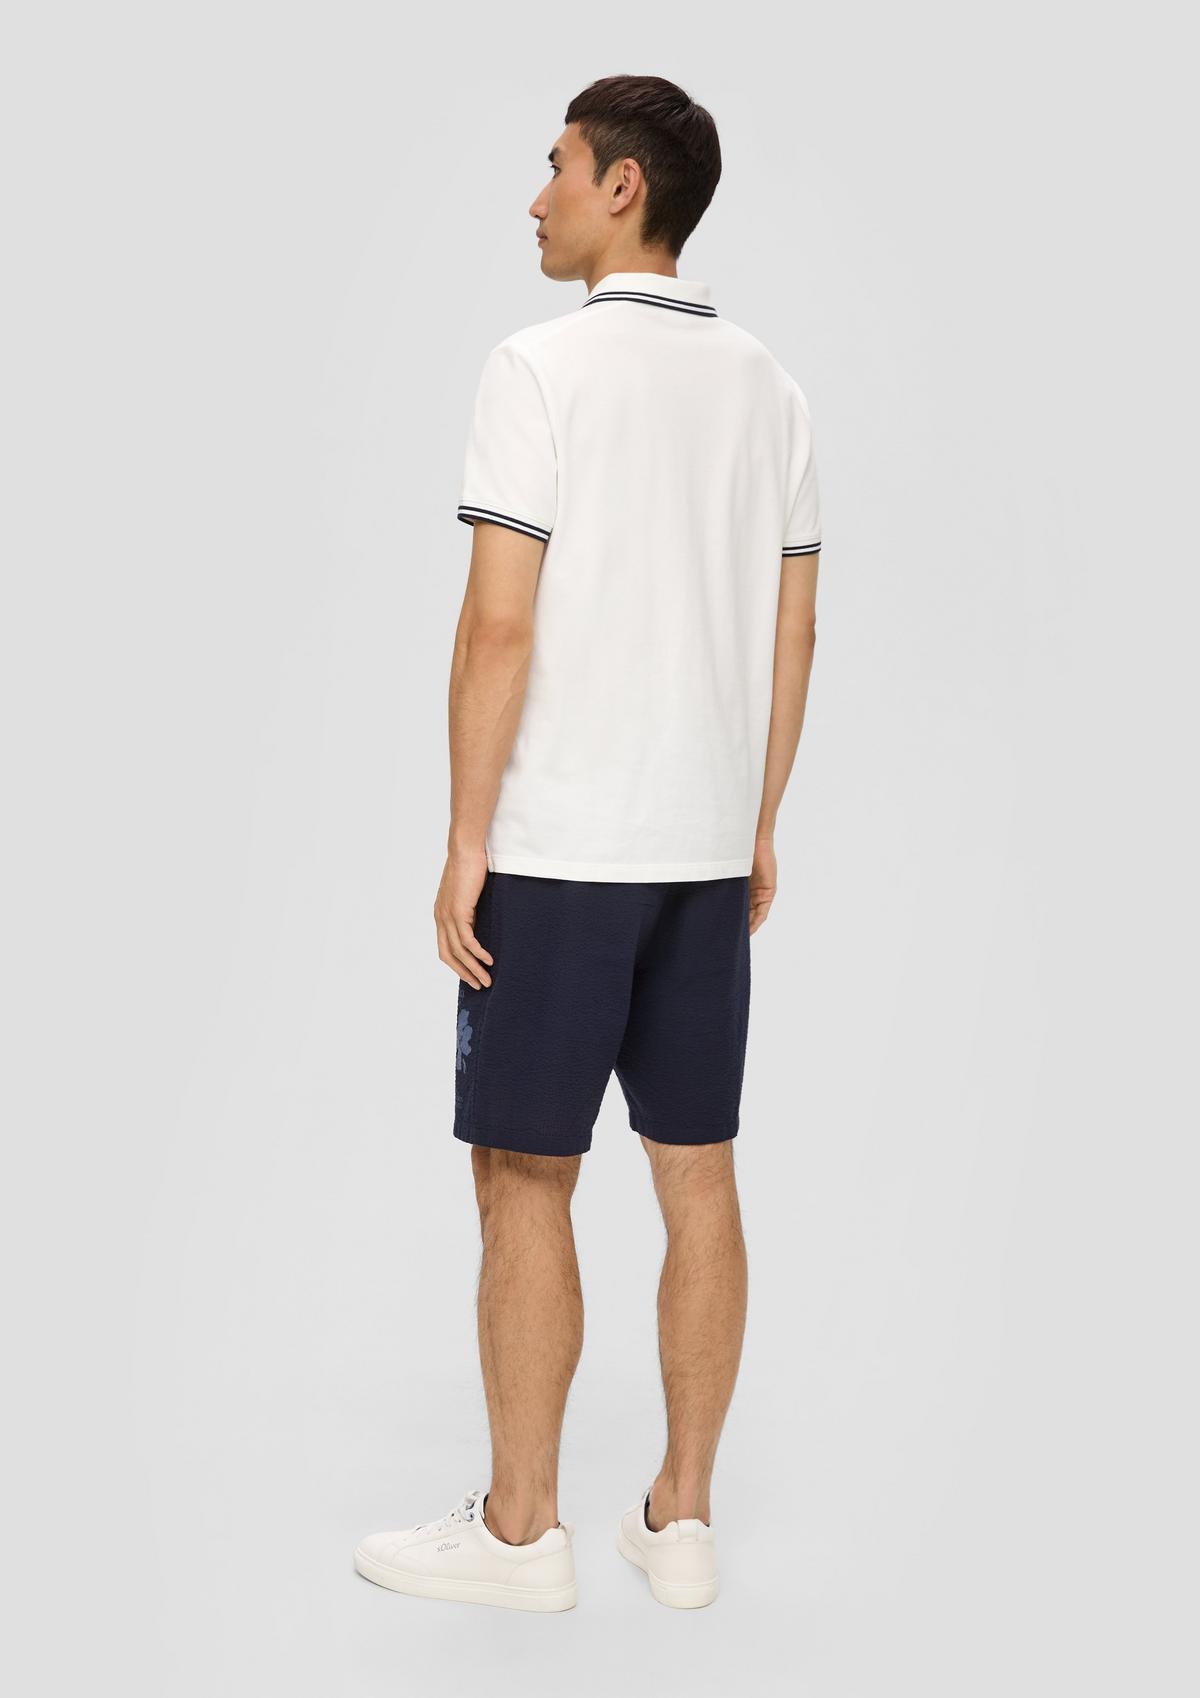 s.Oliver Bermuda-Shorts im Relaxed Fit mit Print-Detail